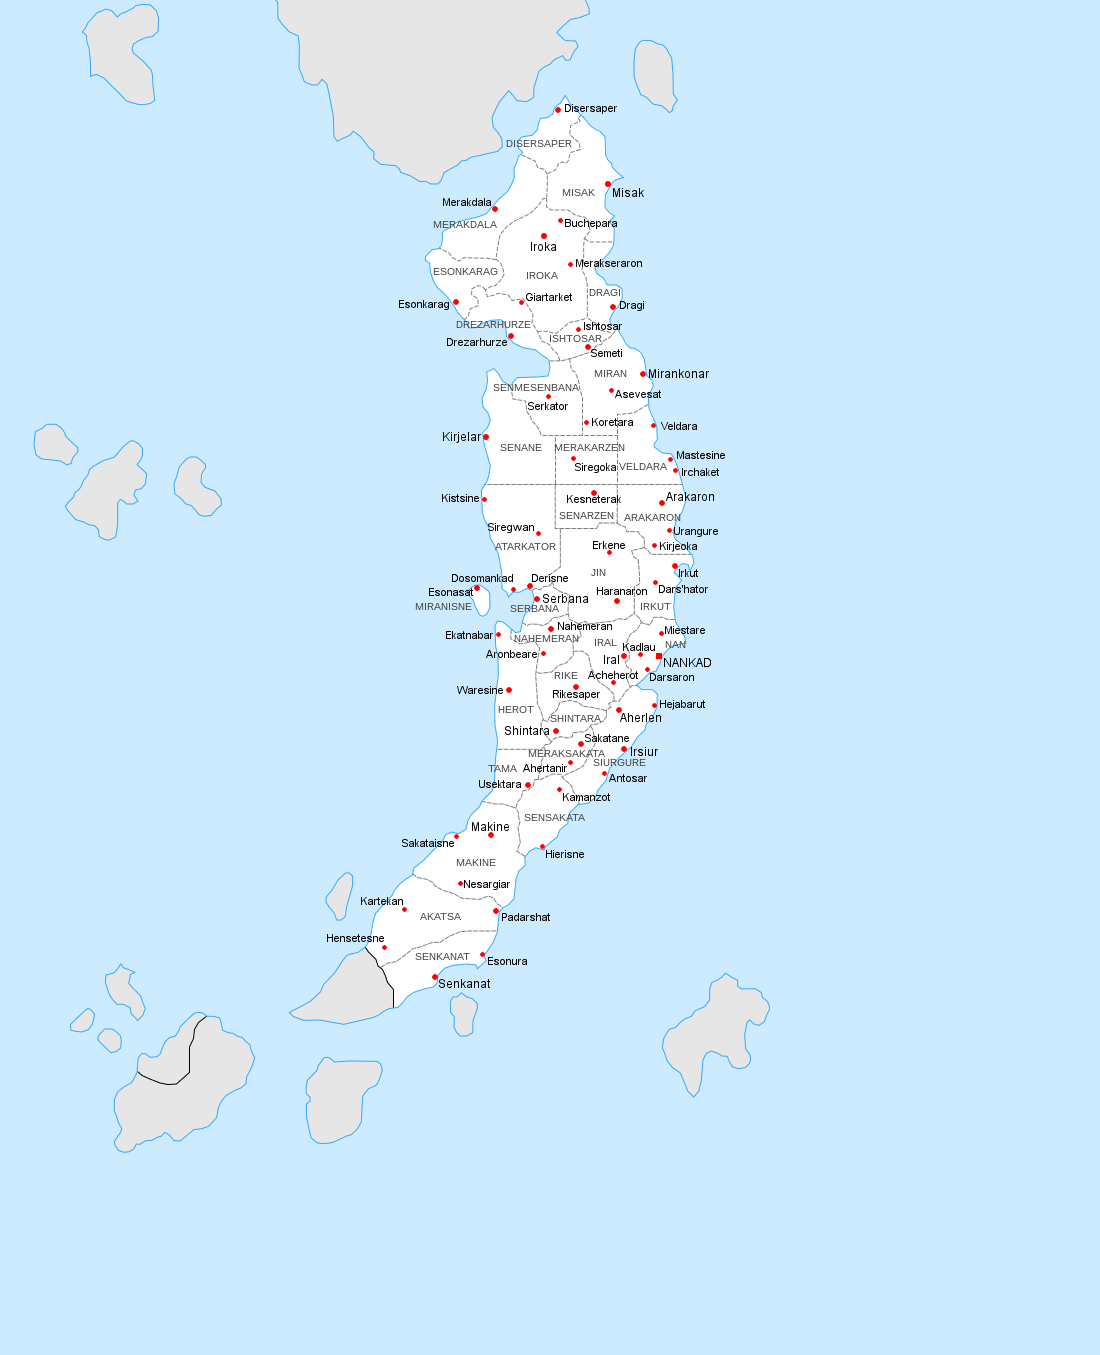 (15 Feb. 2019) Final Group of Prefectures Created Sevetl15